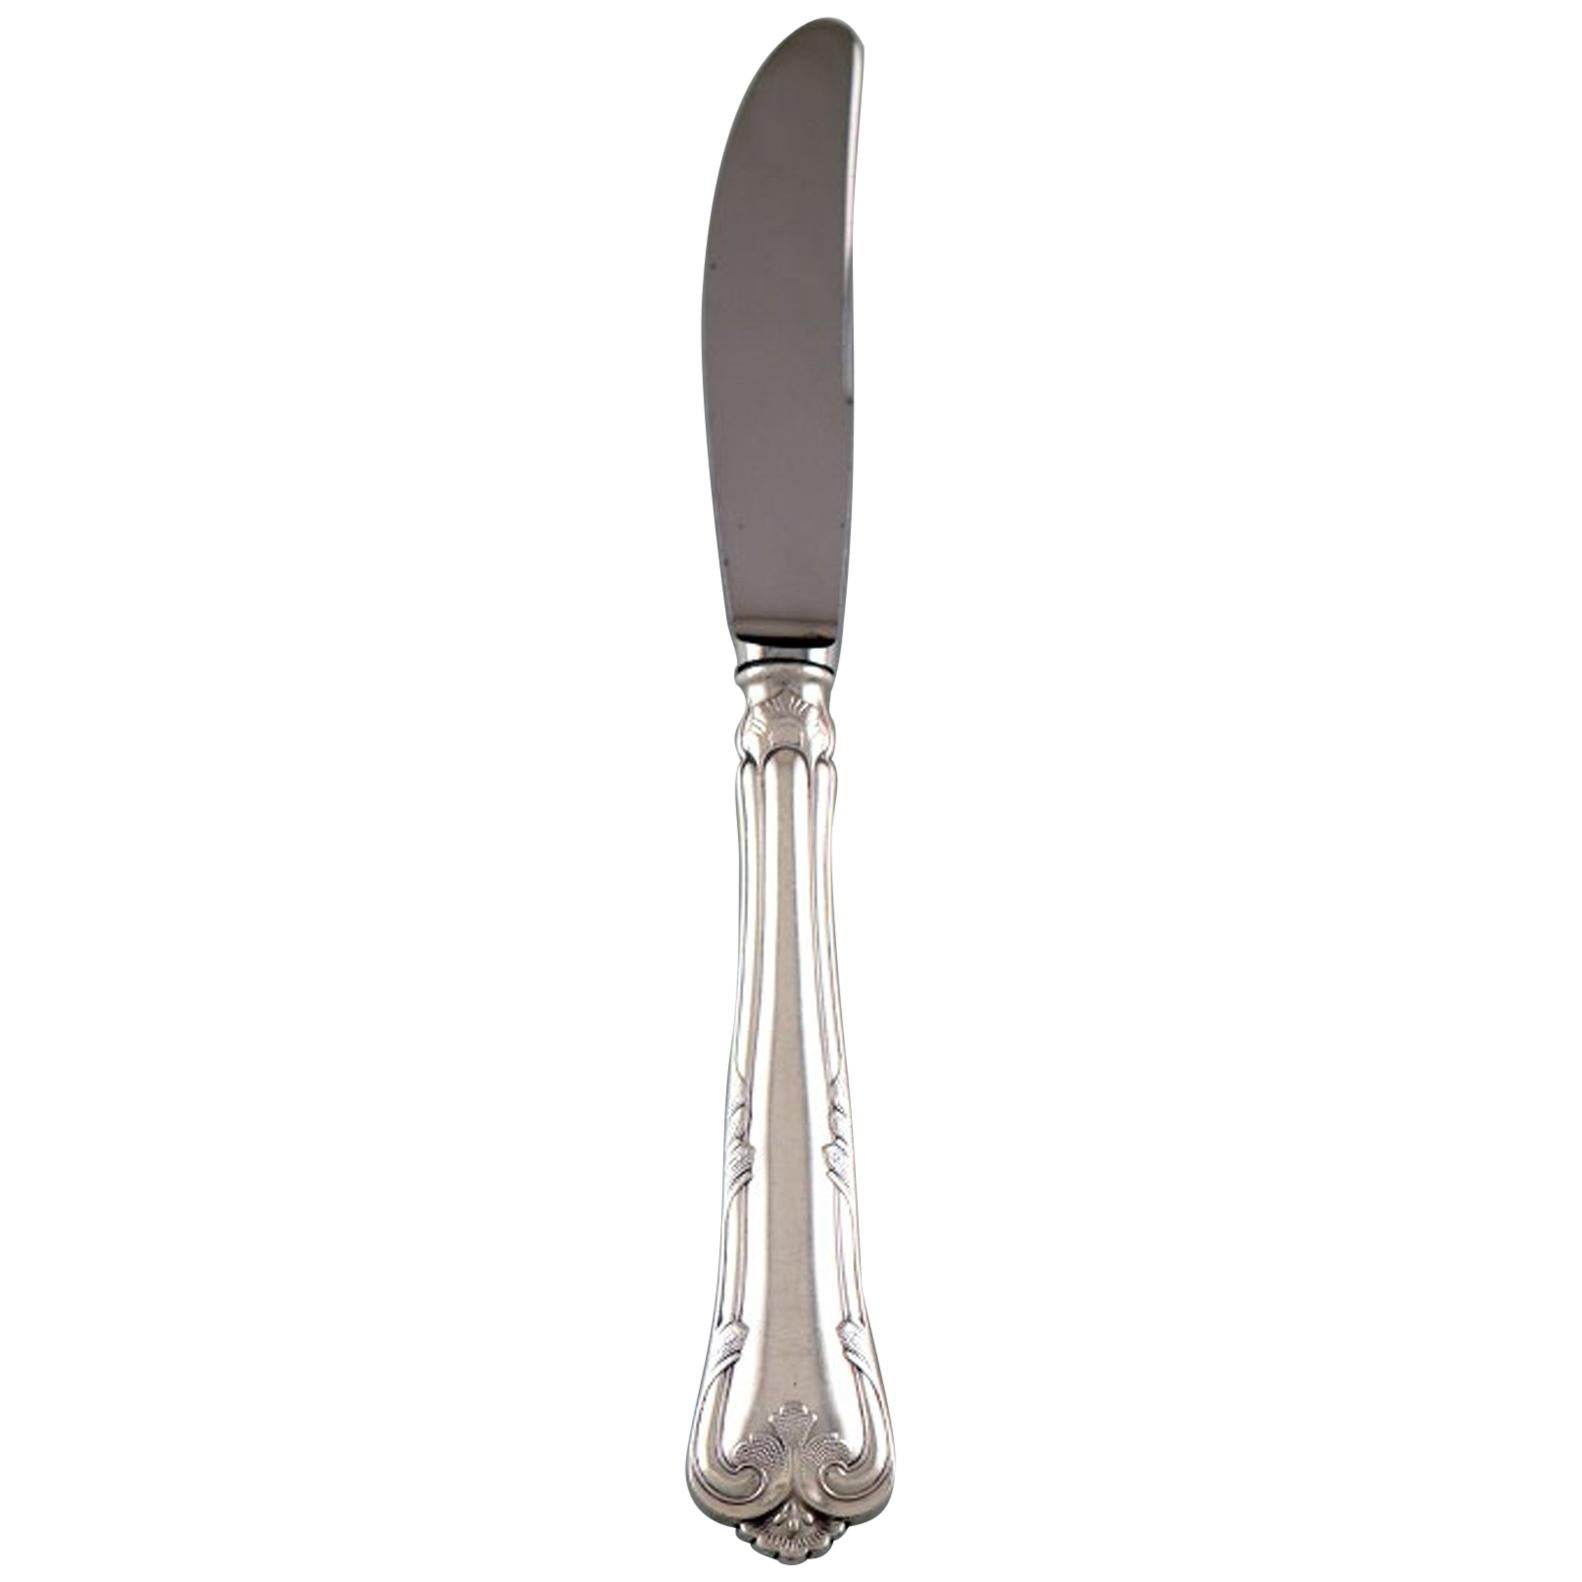 Cohr "Herregaard" Luncheon Knife, Cutlery in Silver, 3 Knives in Stock For Sale